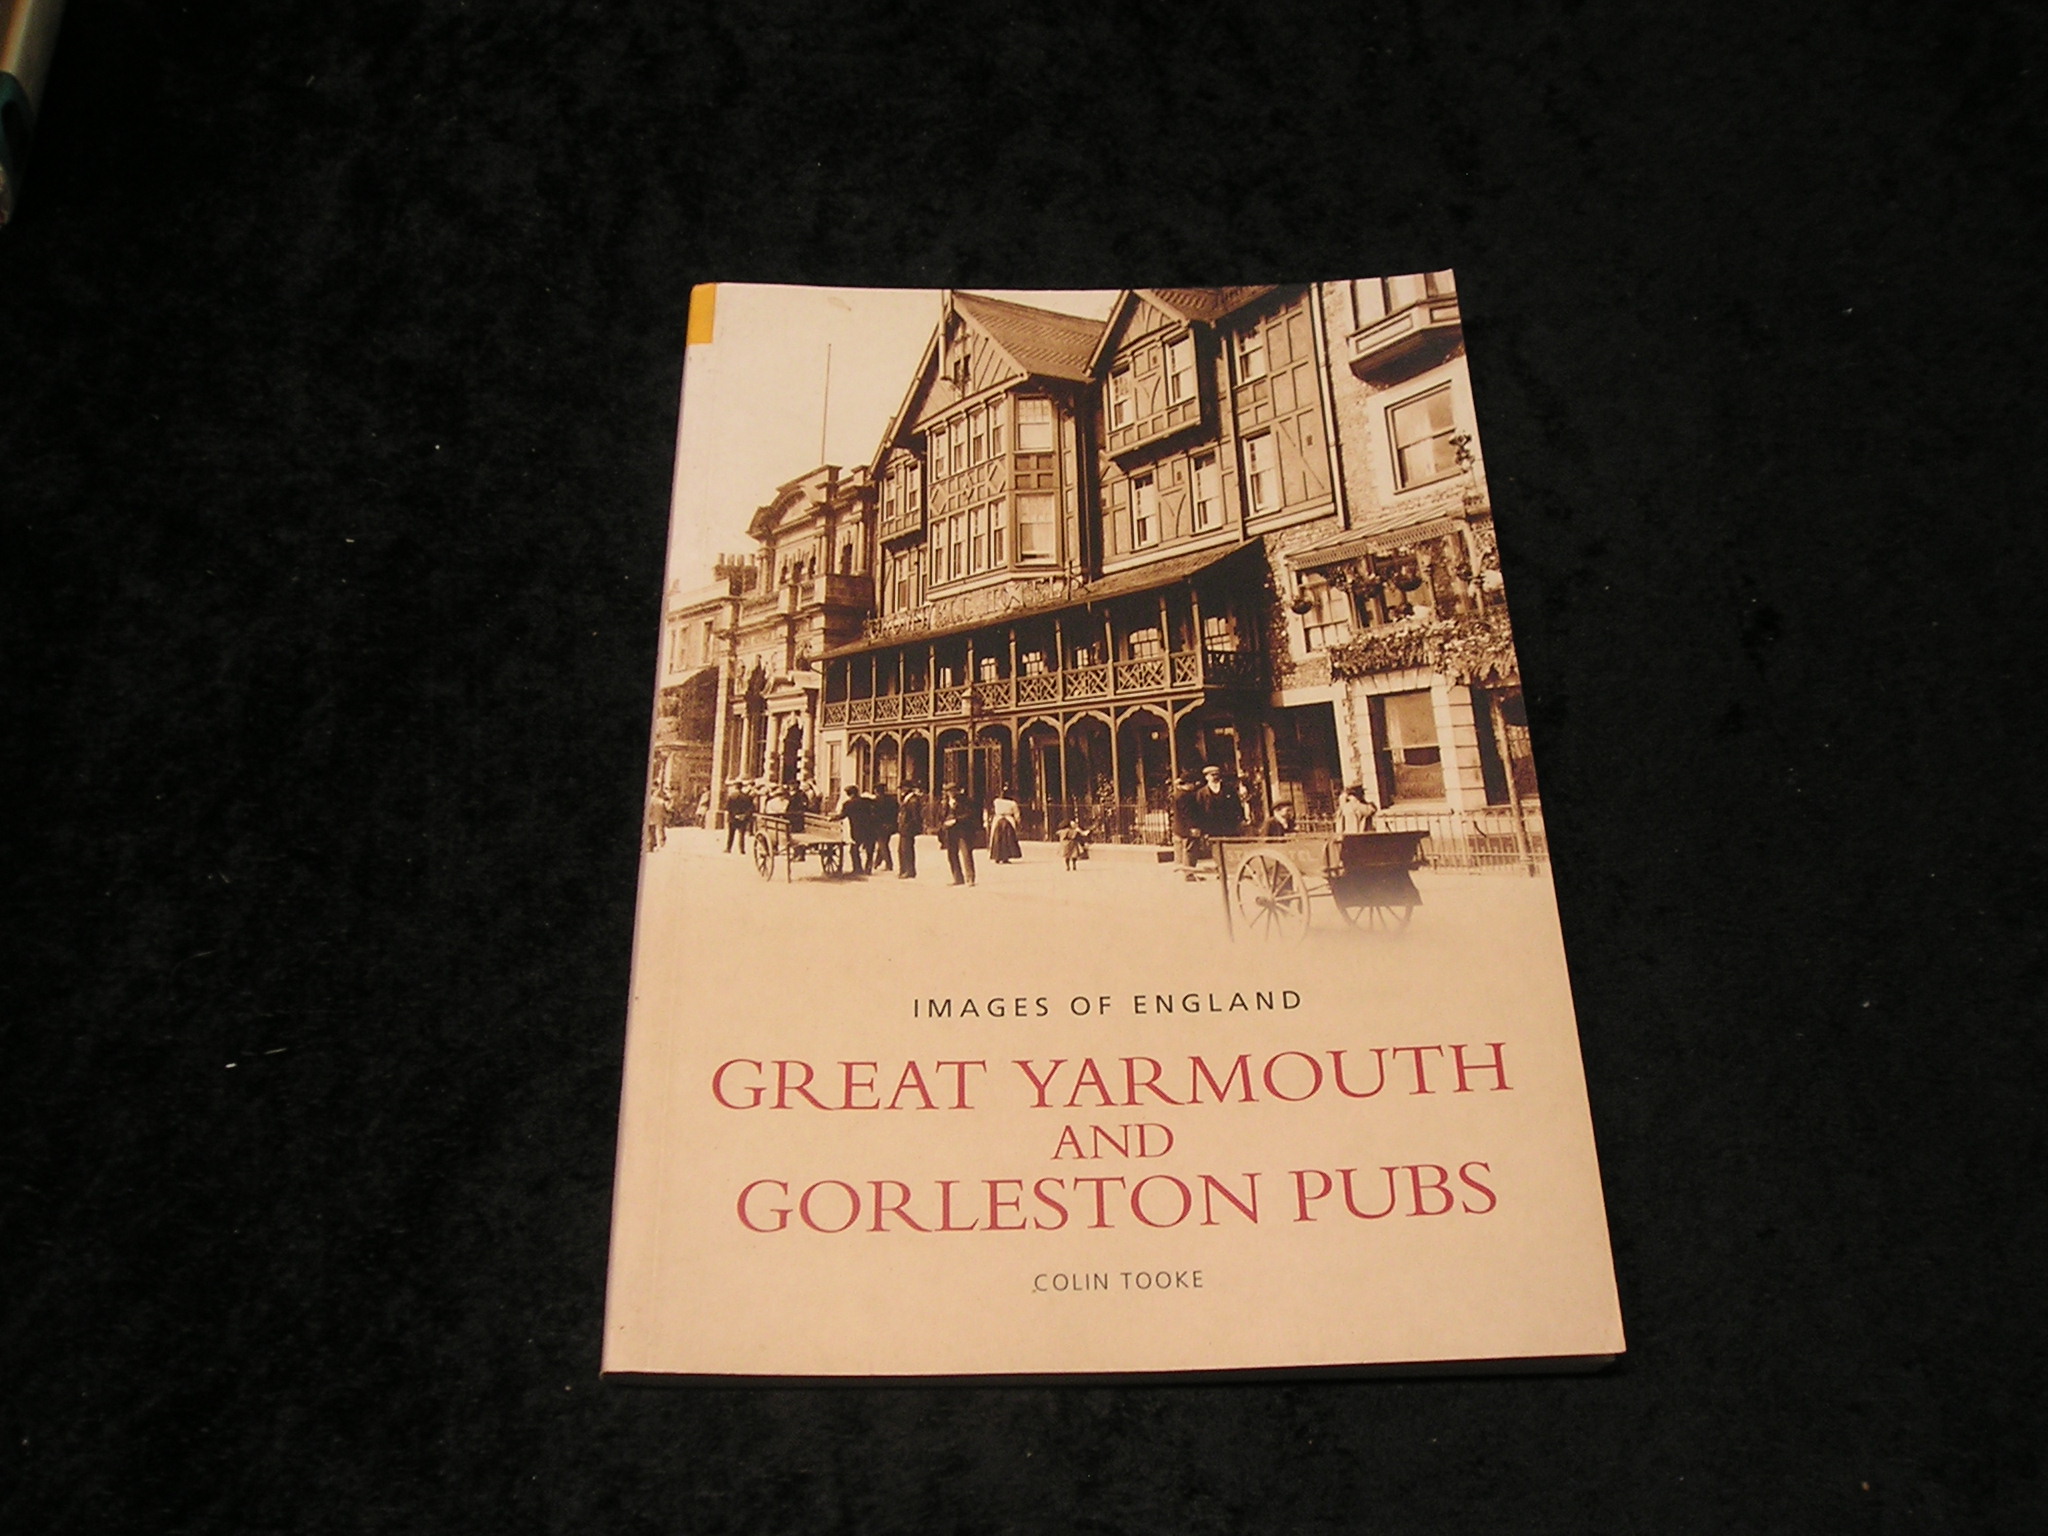 Great Yarmouth and Gorleston Pubs